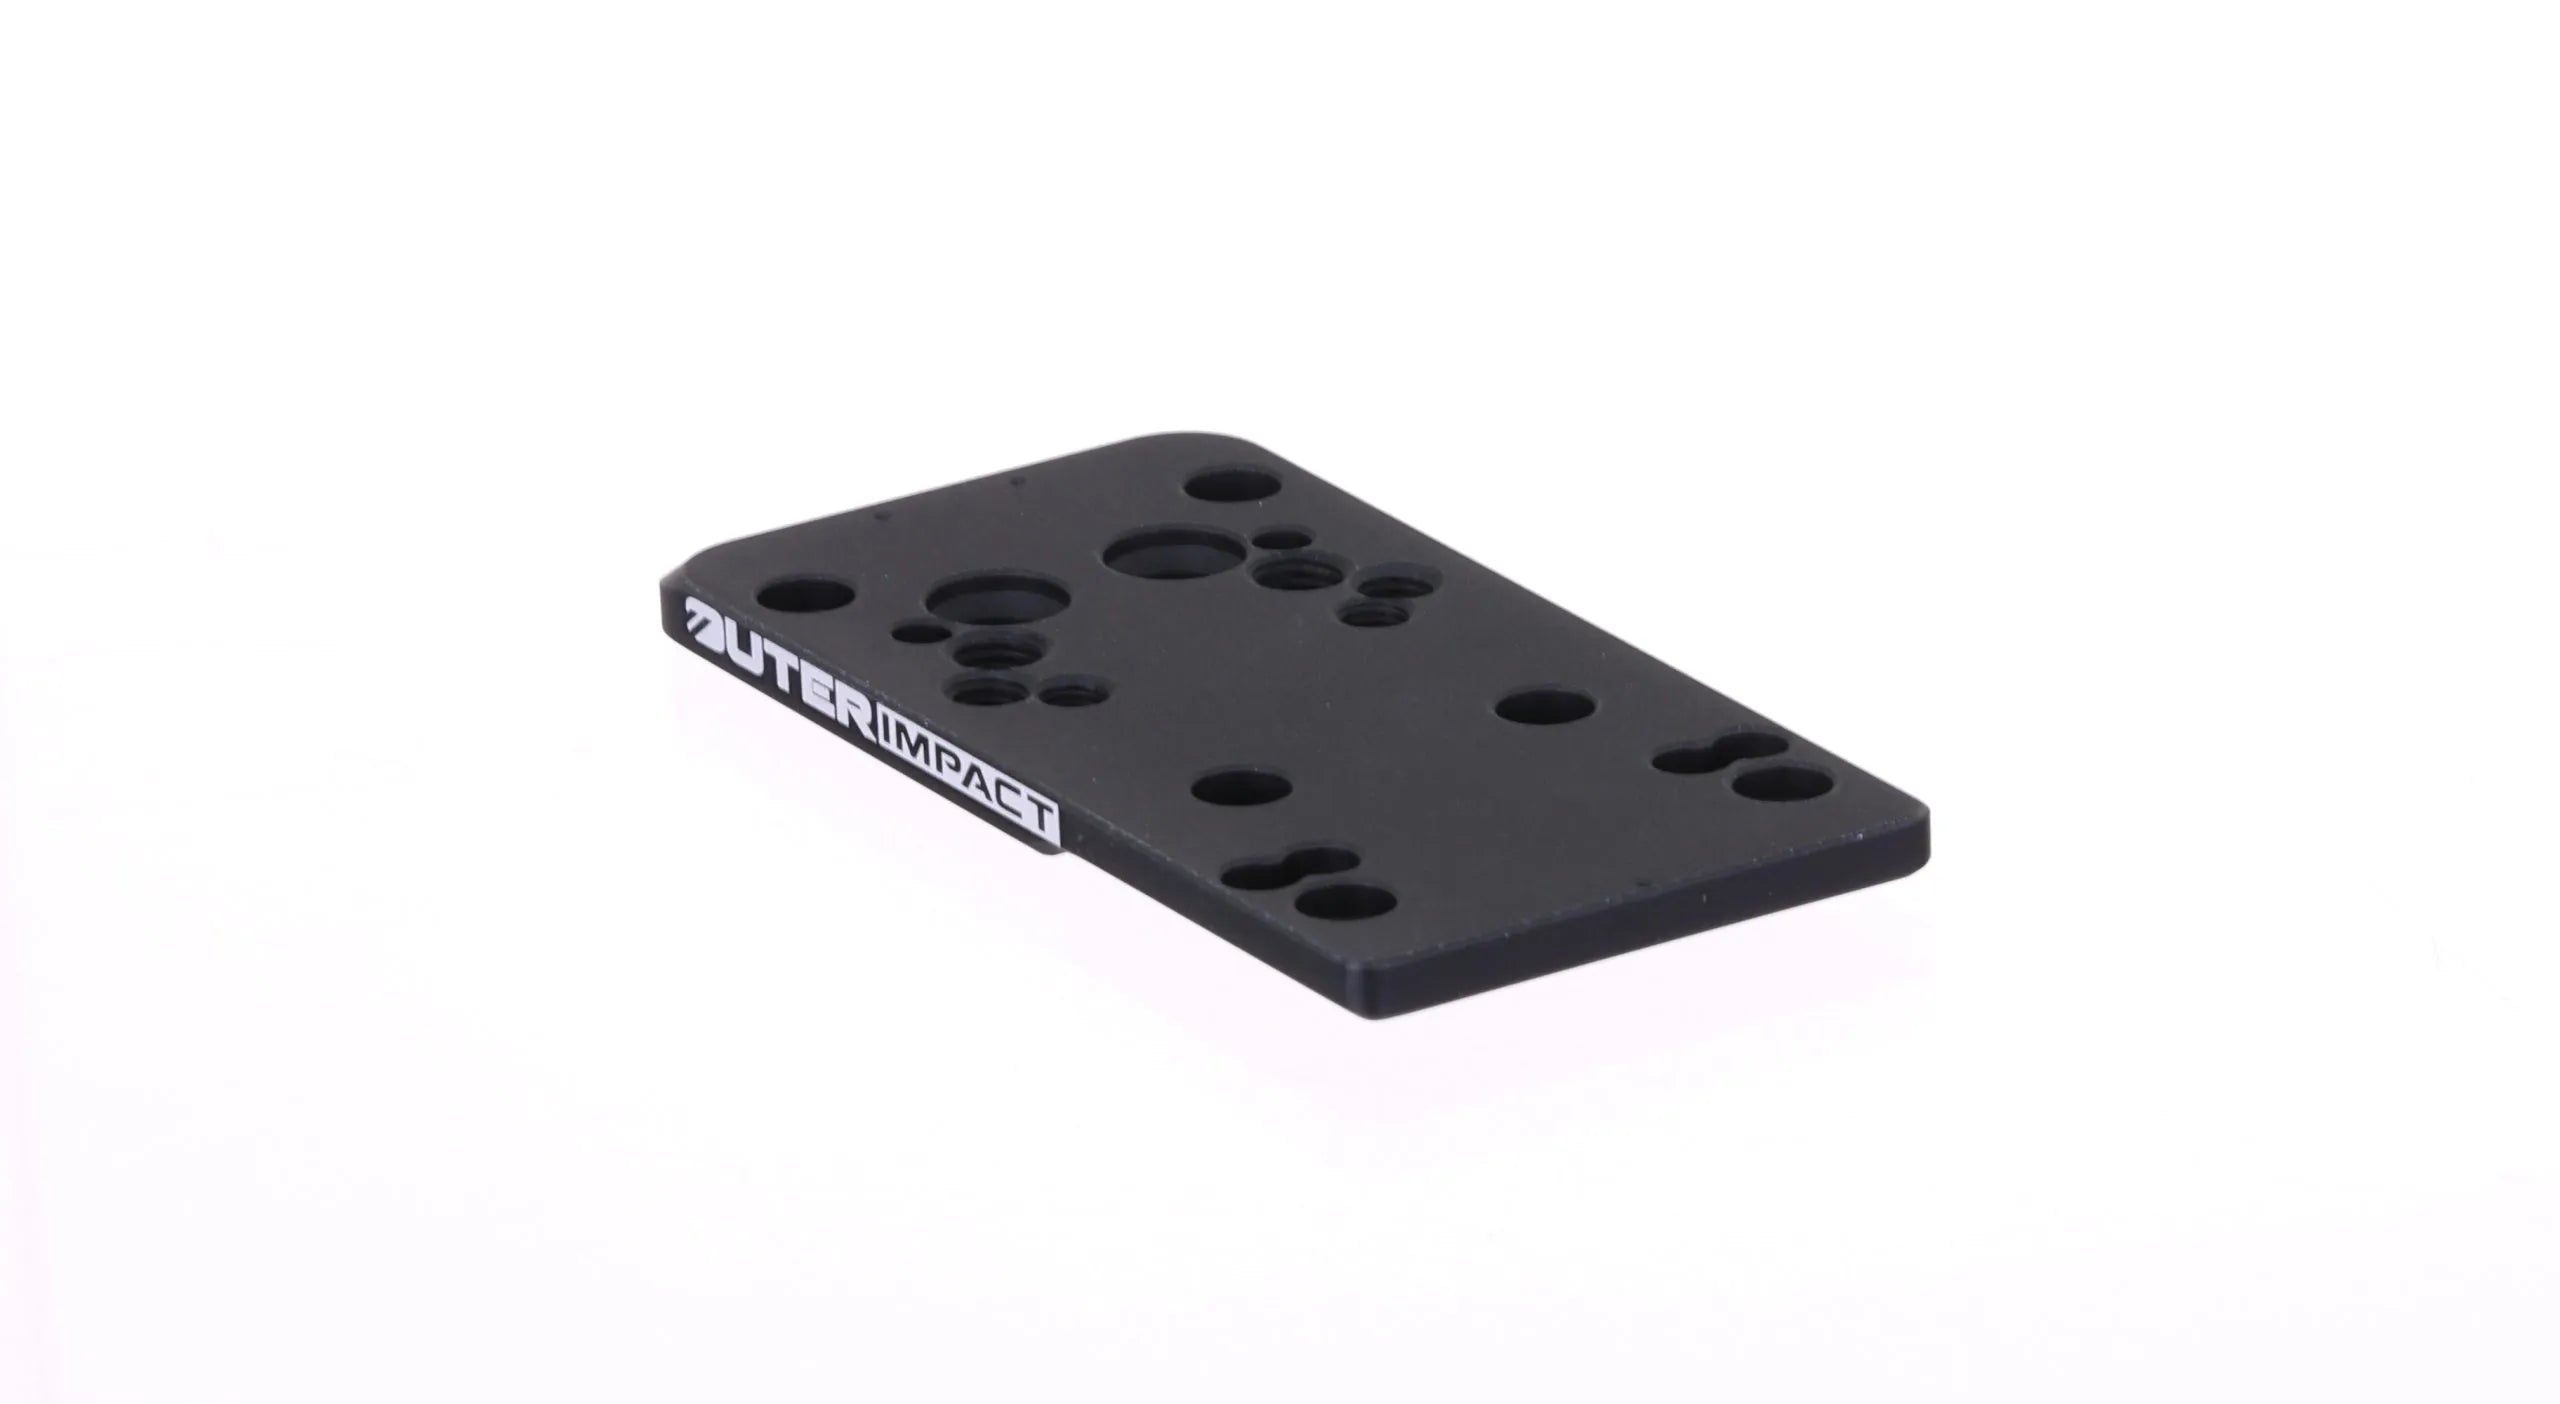 SAR9 Pistol Red Dot Adapter Mount Plate - OuterImpact